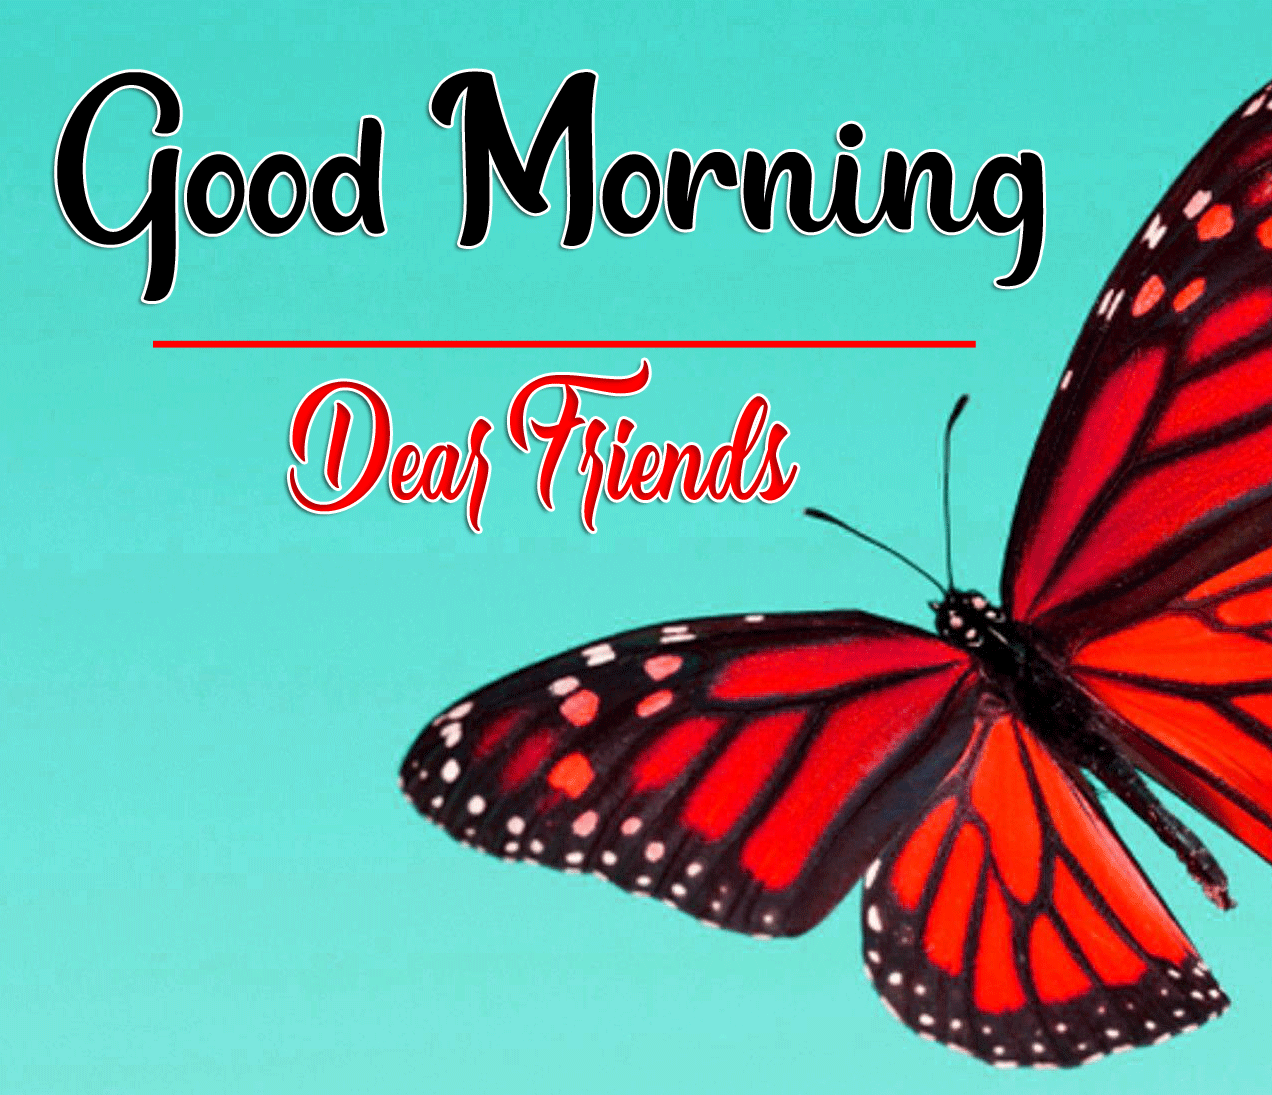 Good Morning Wishes Images HD 1080p 3